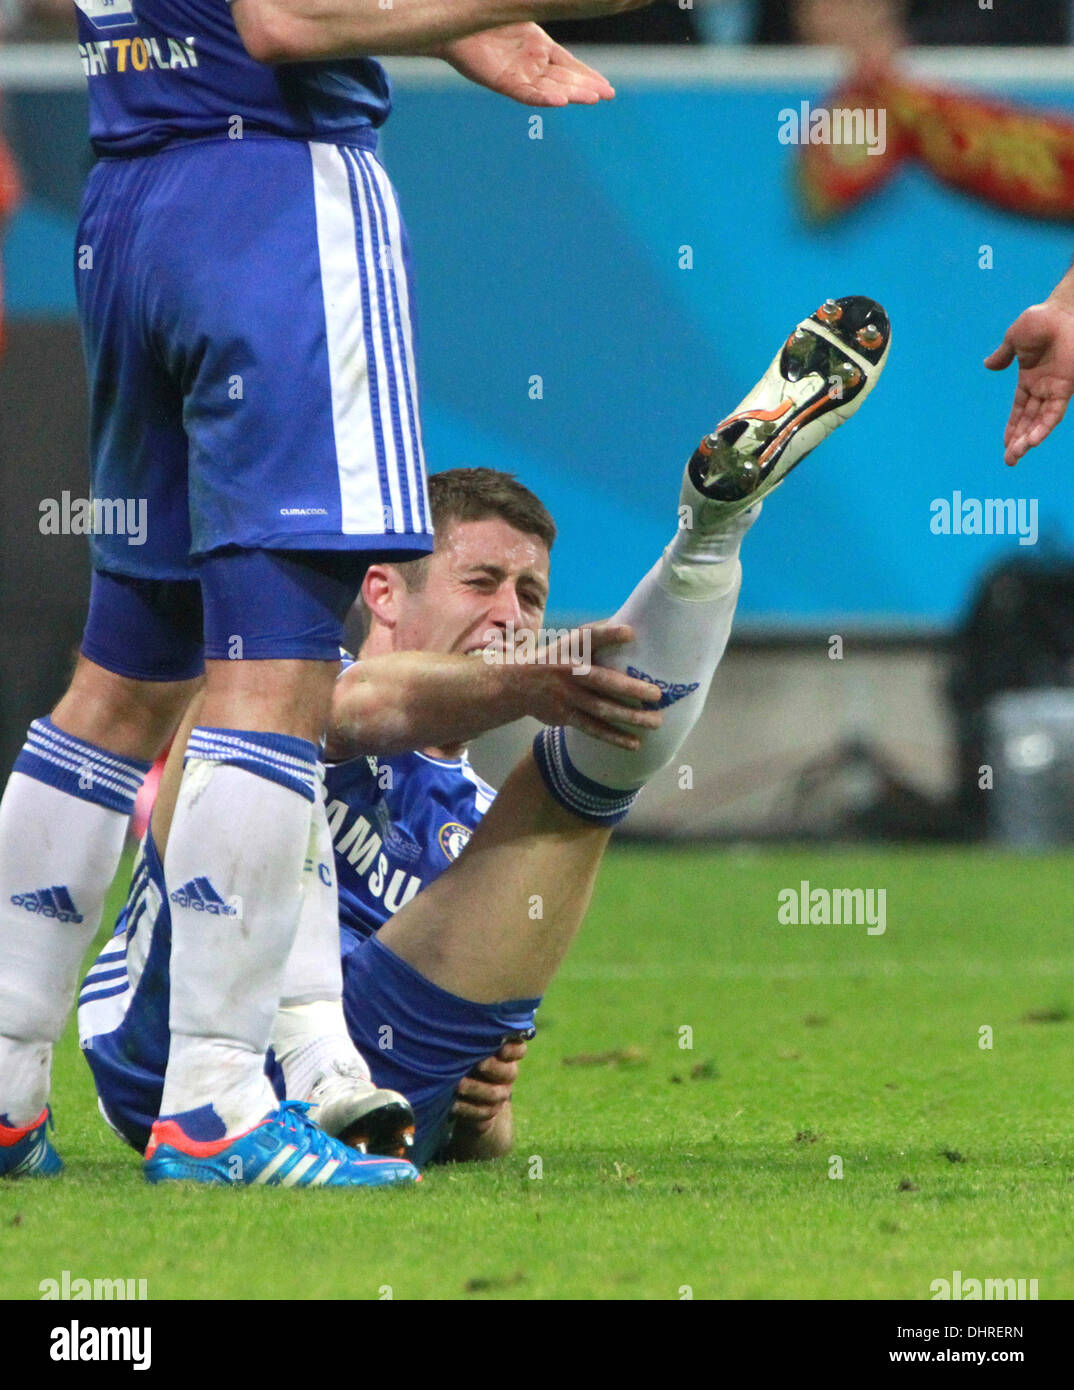 Gary Cahill The 2012 UEFA Champions League final match between Chelsea and Bayern Munich at the Allianz Arena Munich, Germany - 19.05.12 Stock Photo